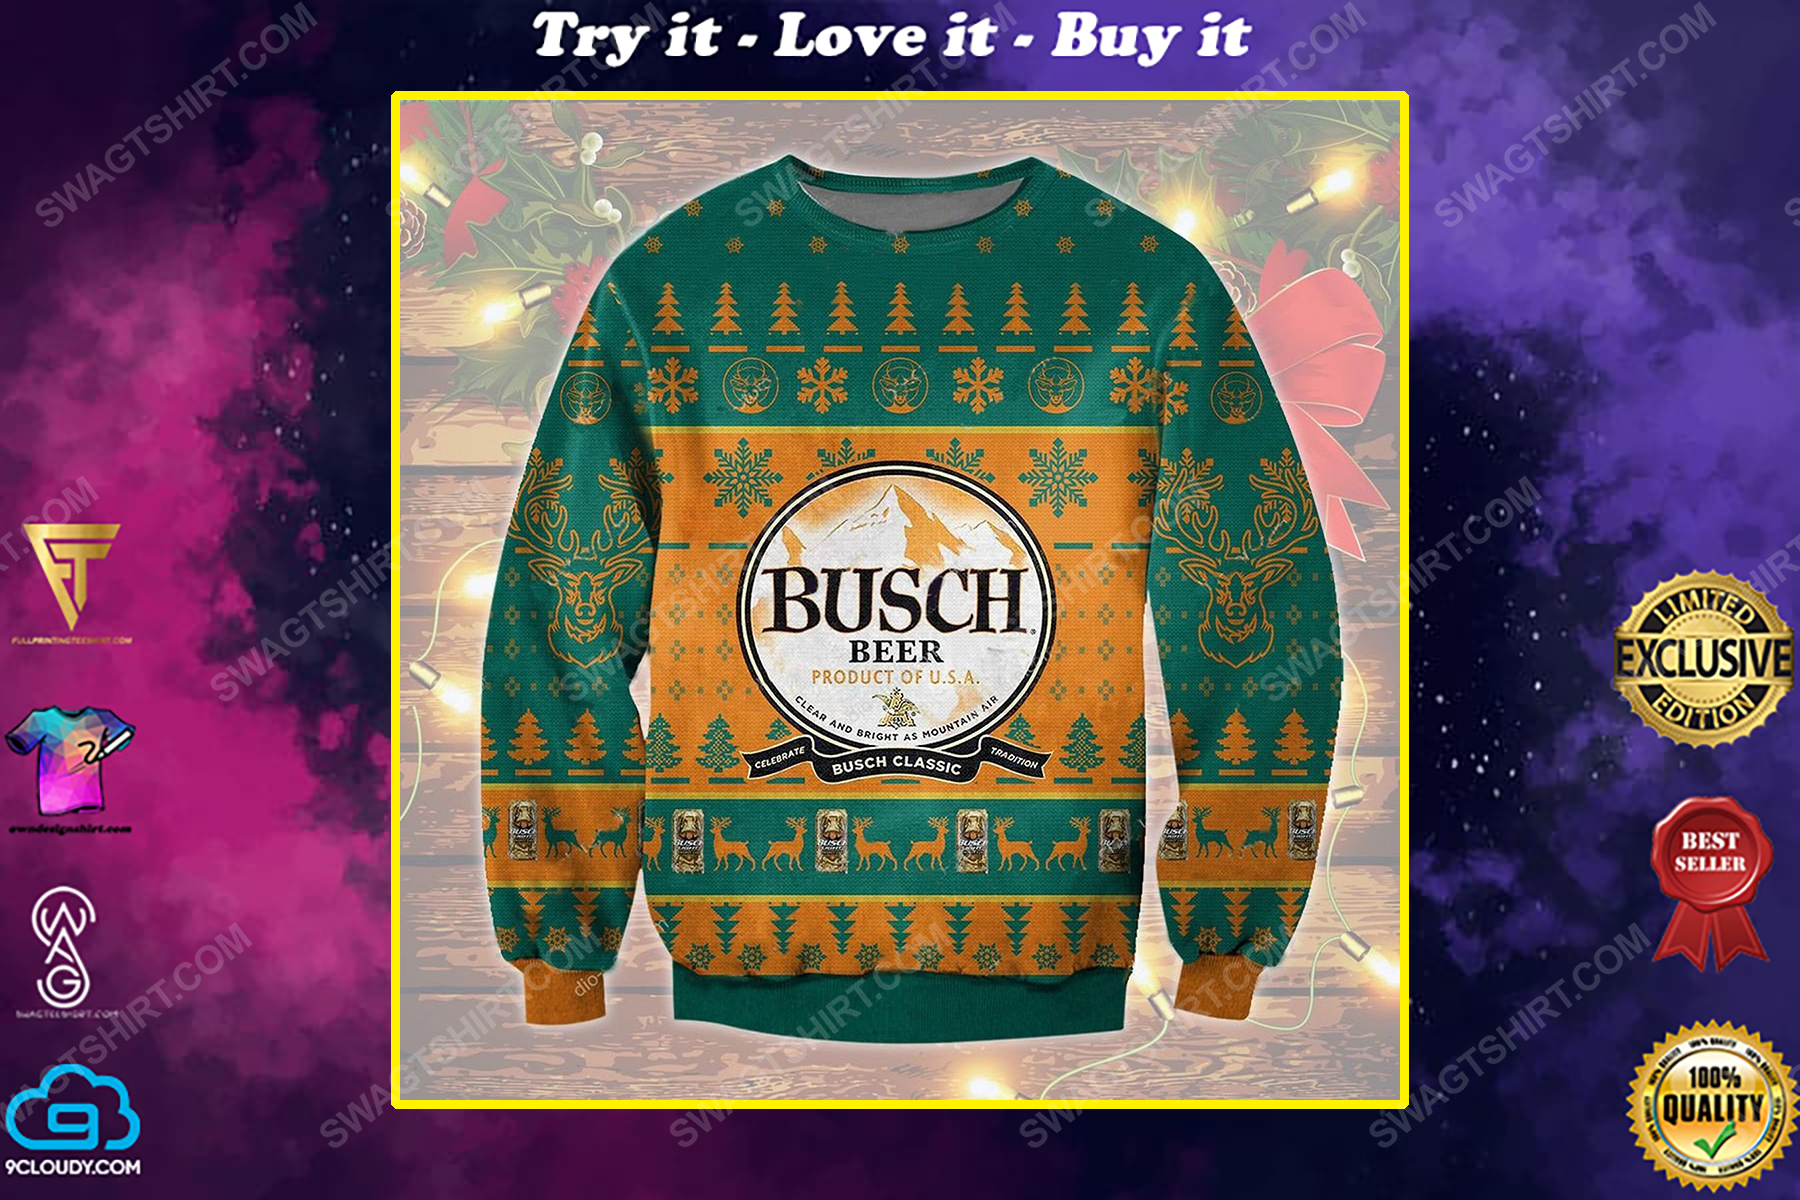 Busch beer product of usa ugly christmas sweater